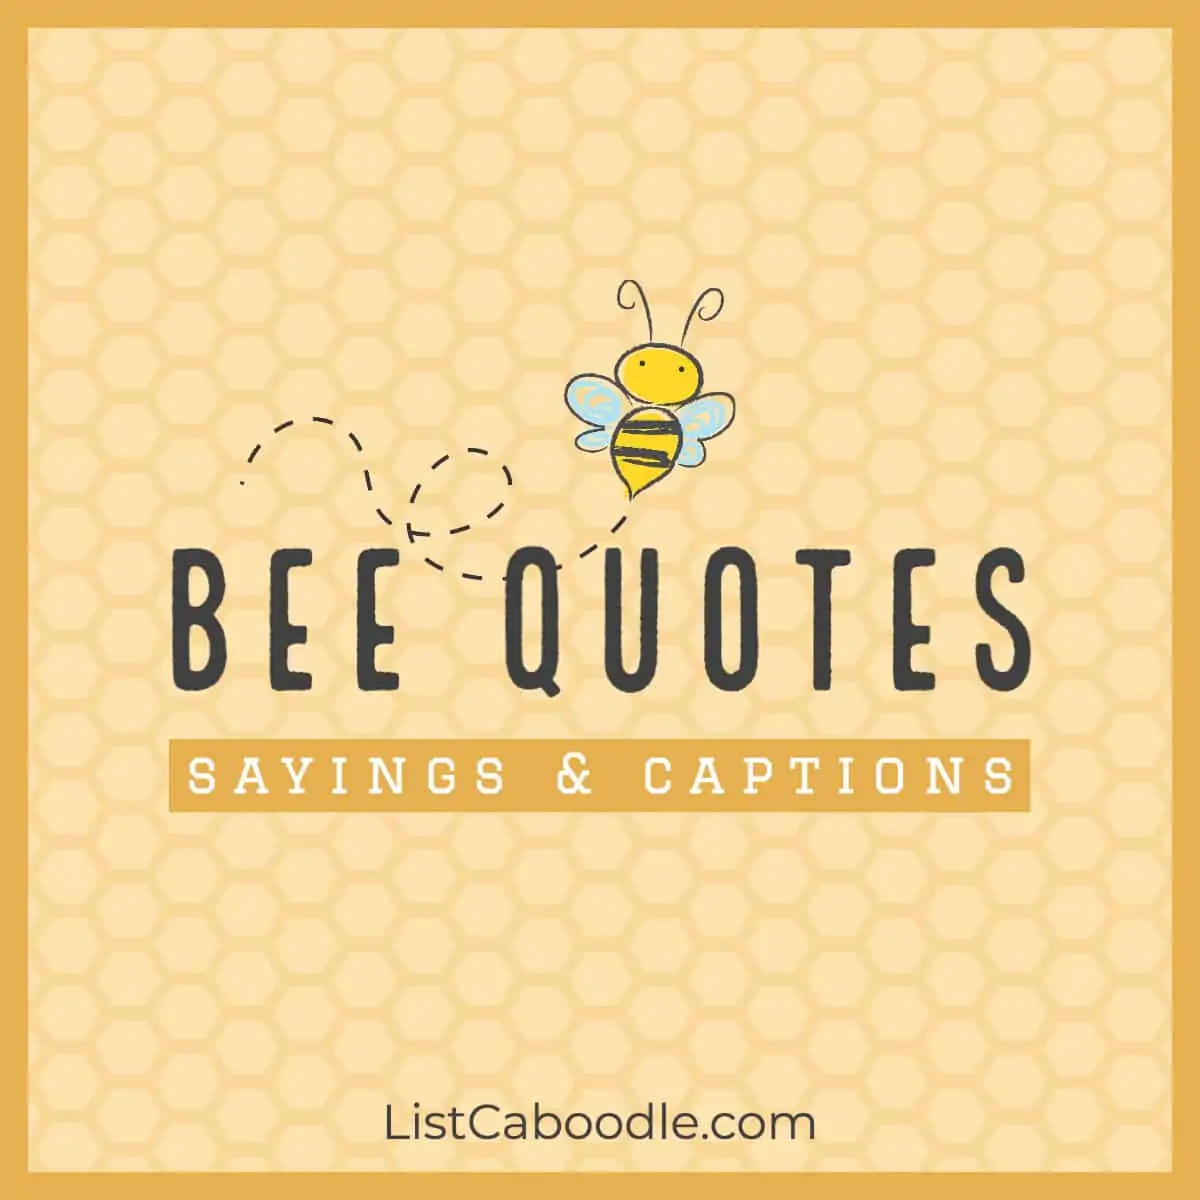 Bee quotes image